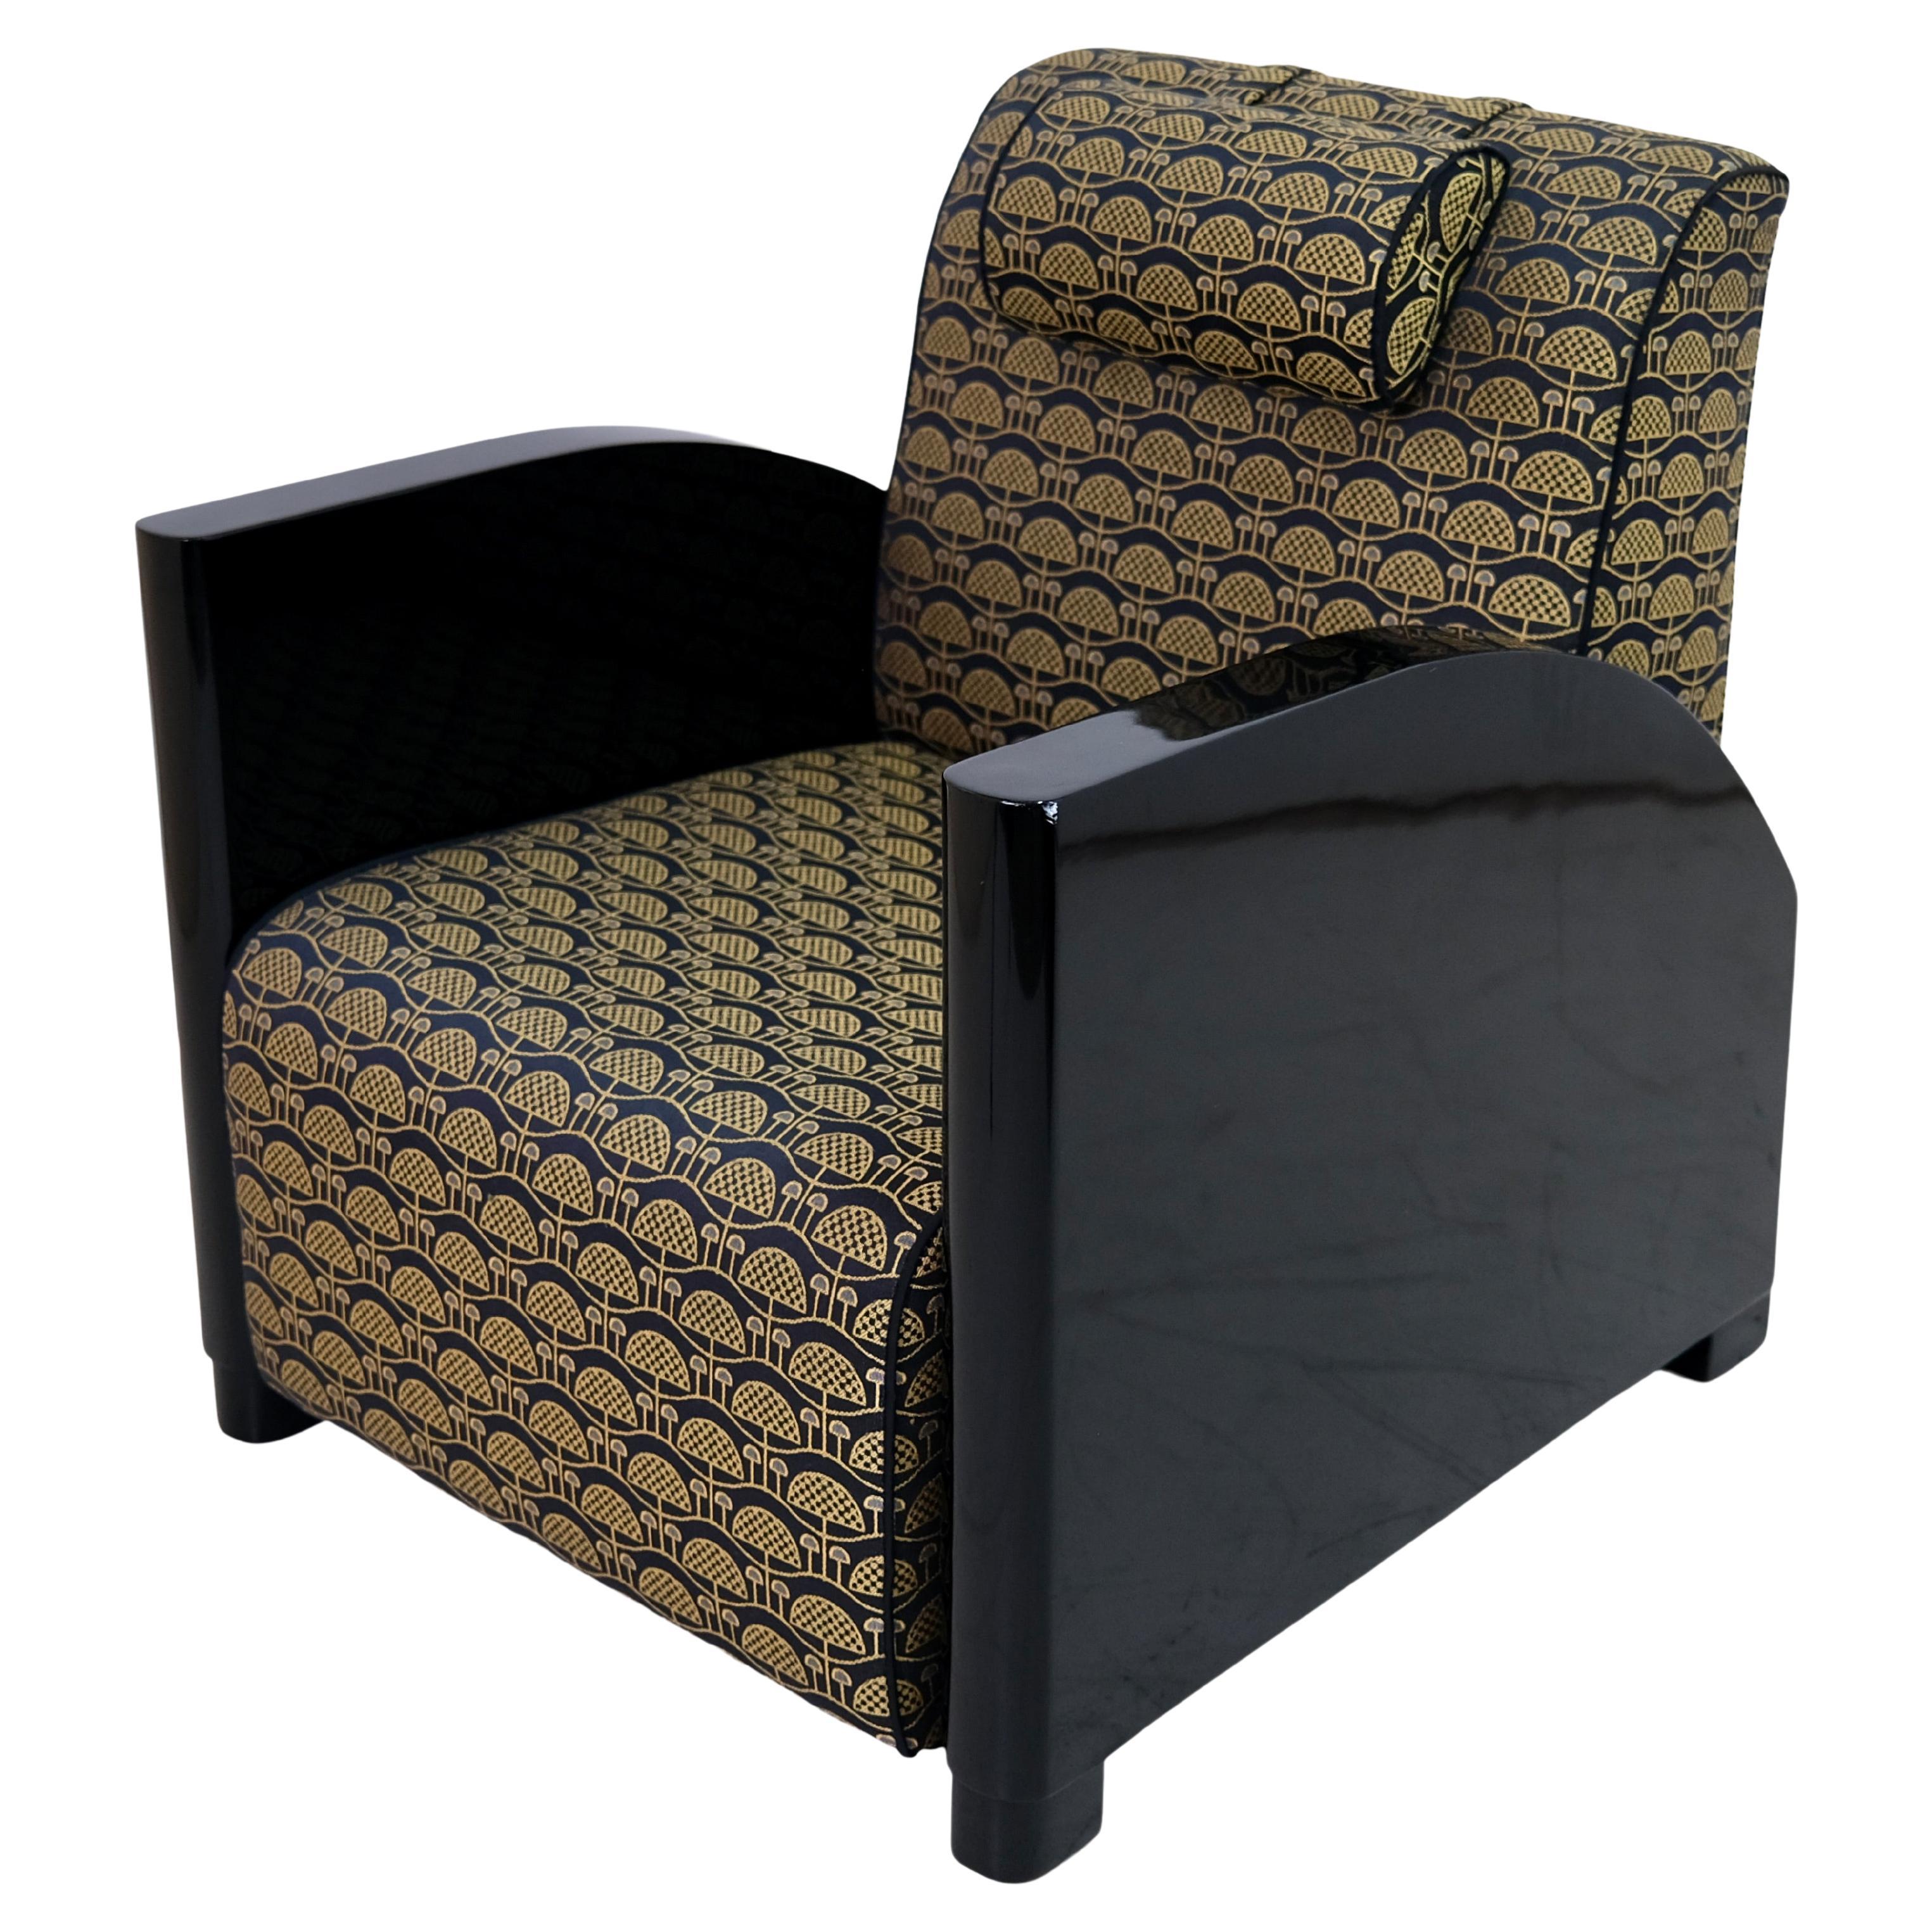 Set of 2 Art Deco Club Chairs in Black Lacquer and Golden Upholstery